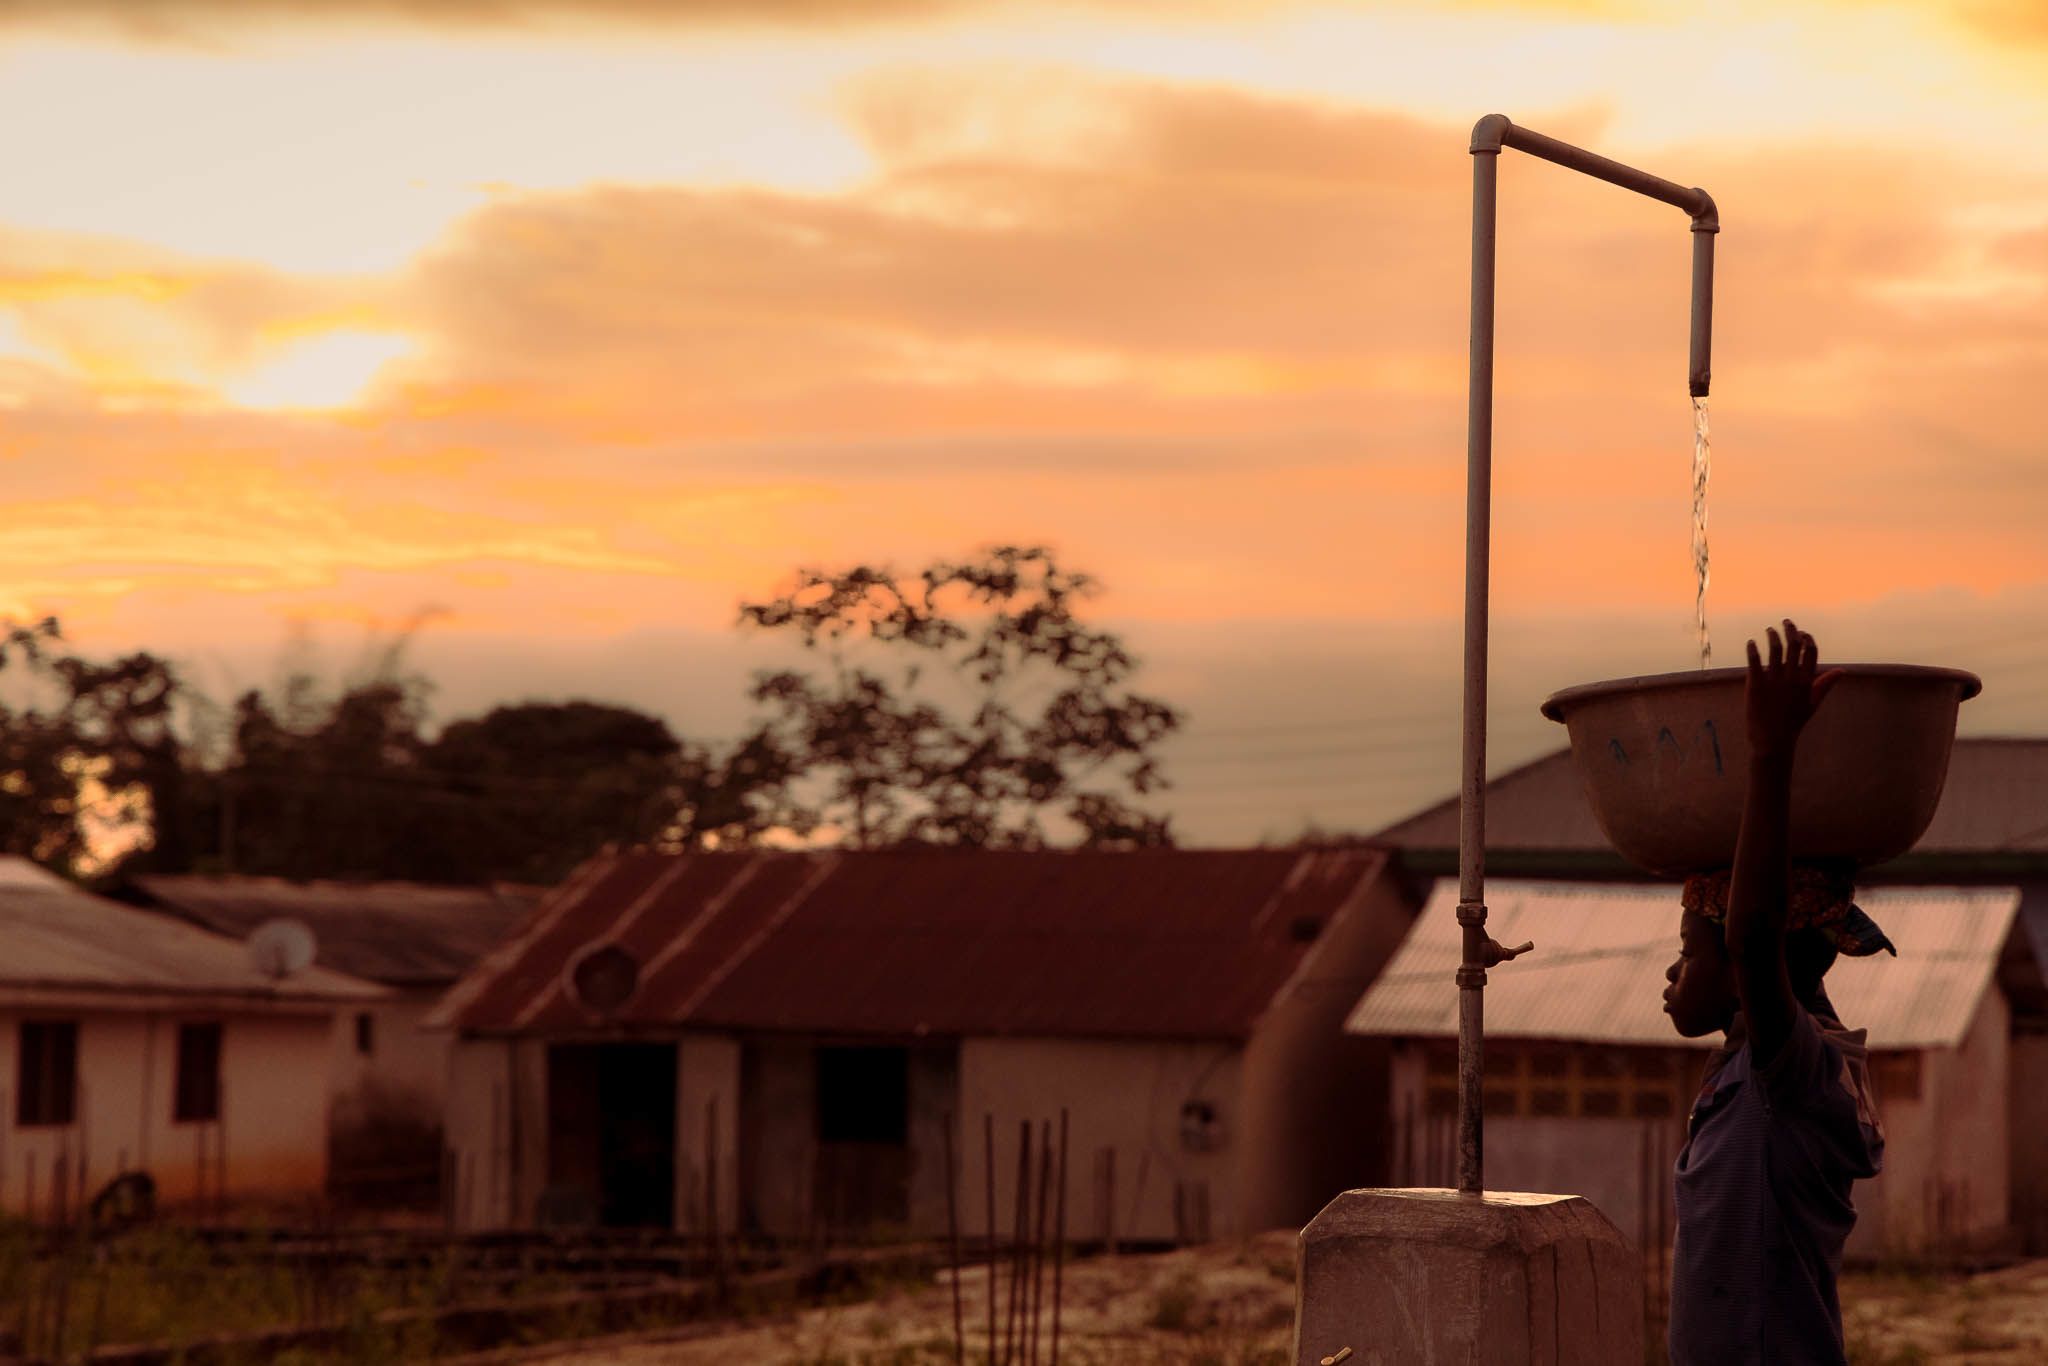 Young Ghanaian boy fetches water from standpipes as the sun sets.